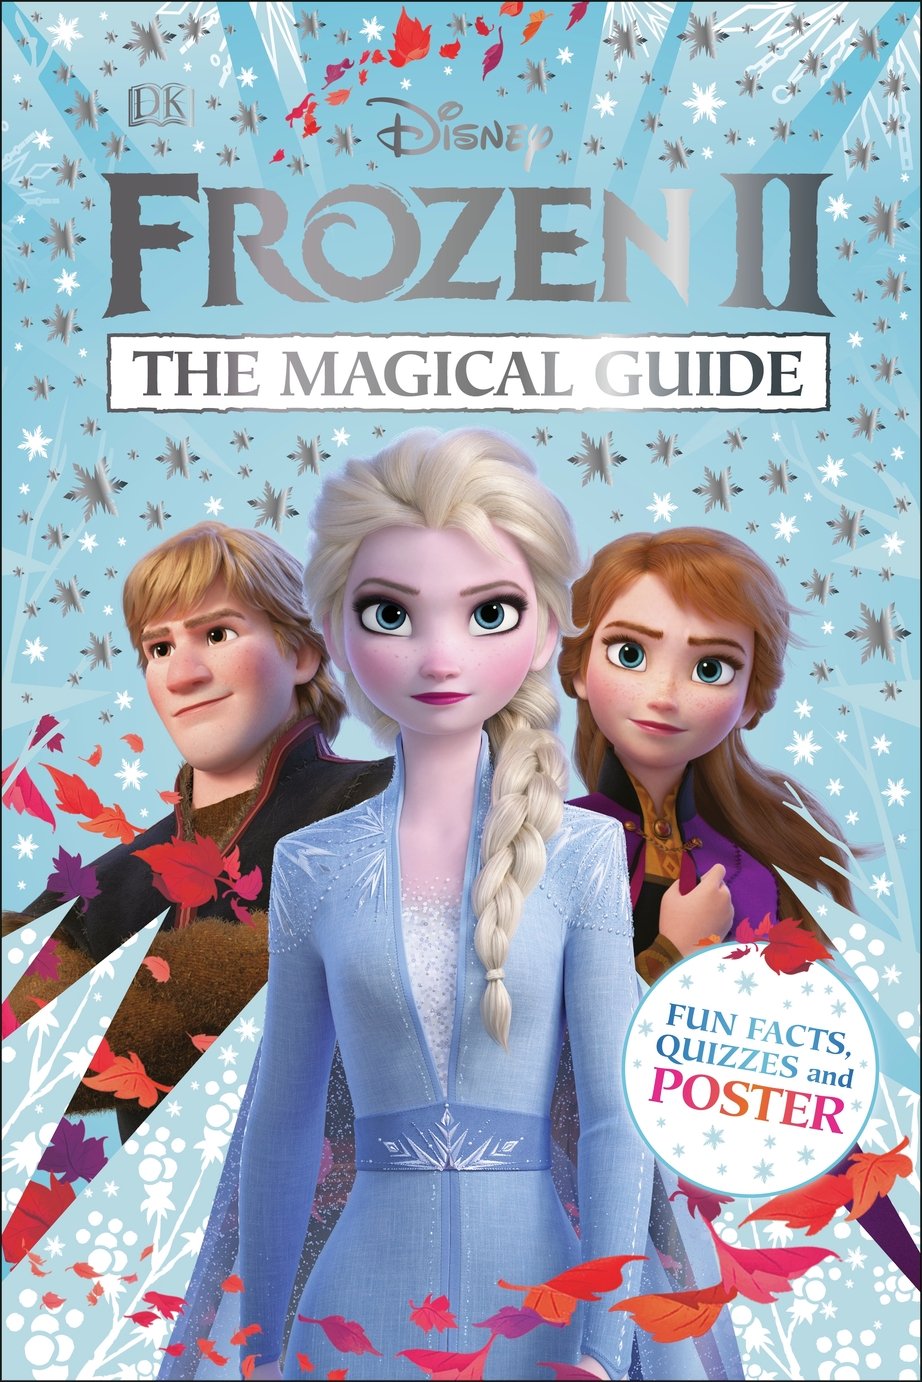 Disney's Frozen 2: The Magical Guide